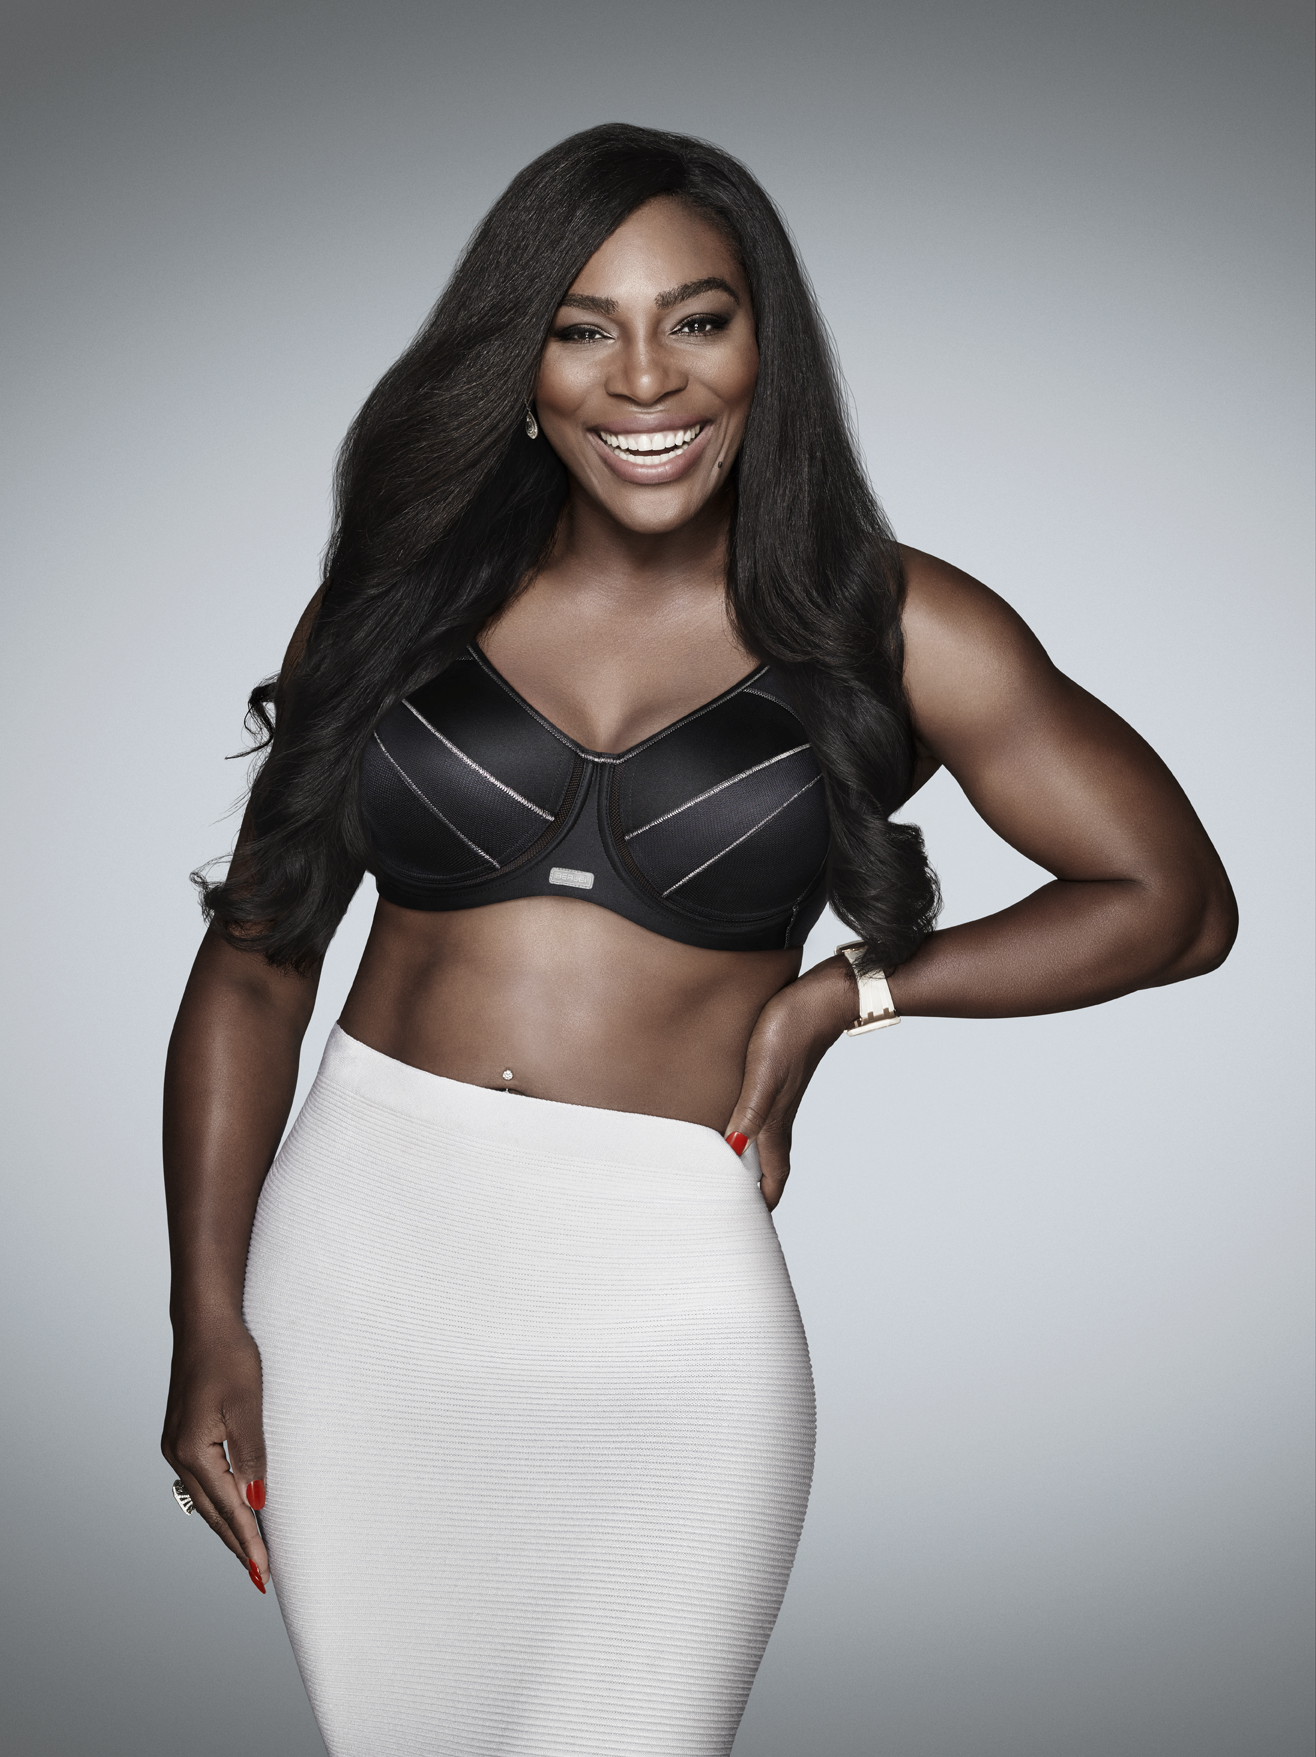 Berlei Bounces into US market With Serena Williams As The Star